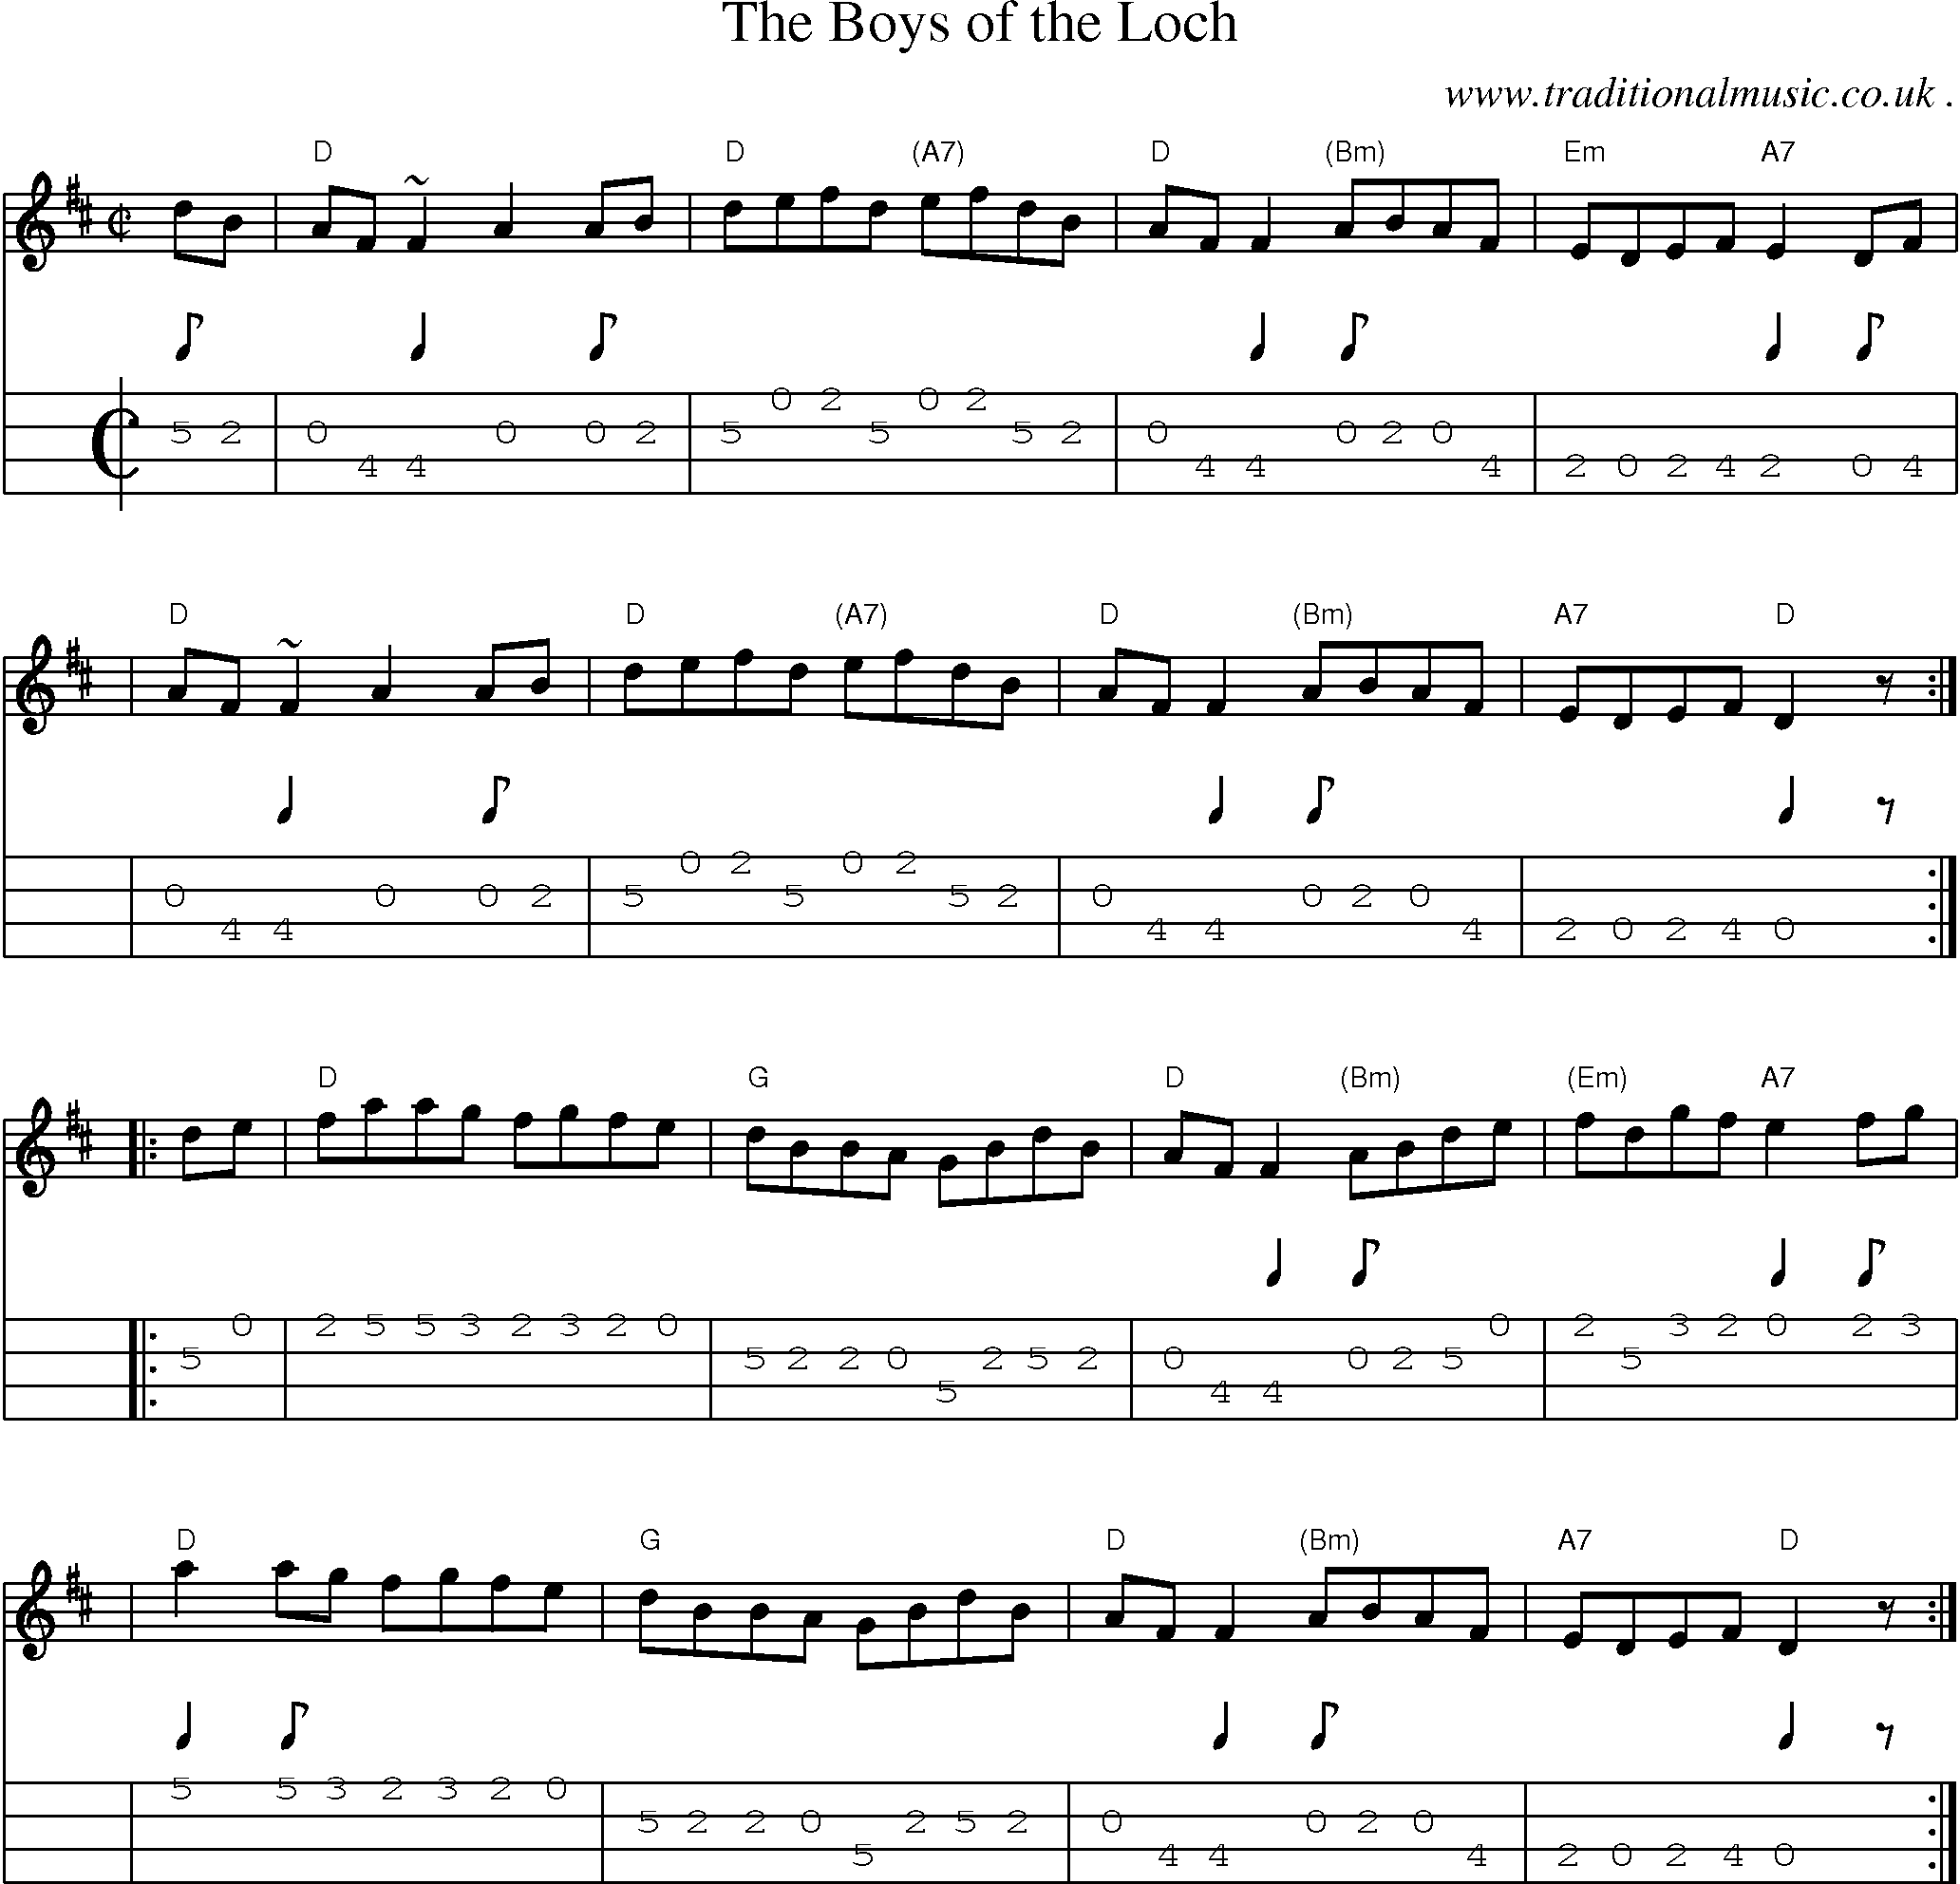 Sheet-music  score, Chords and Mandolin Tabs for The Boys Of The Loch